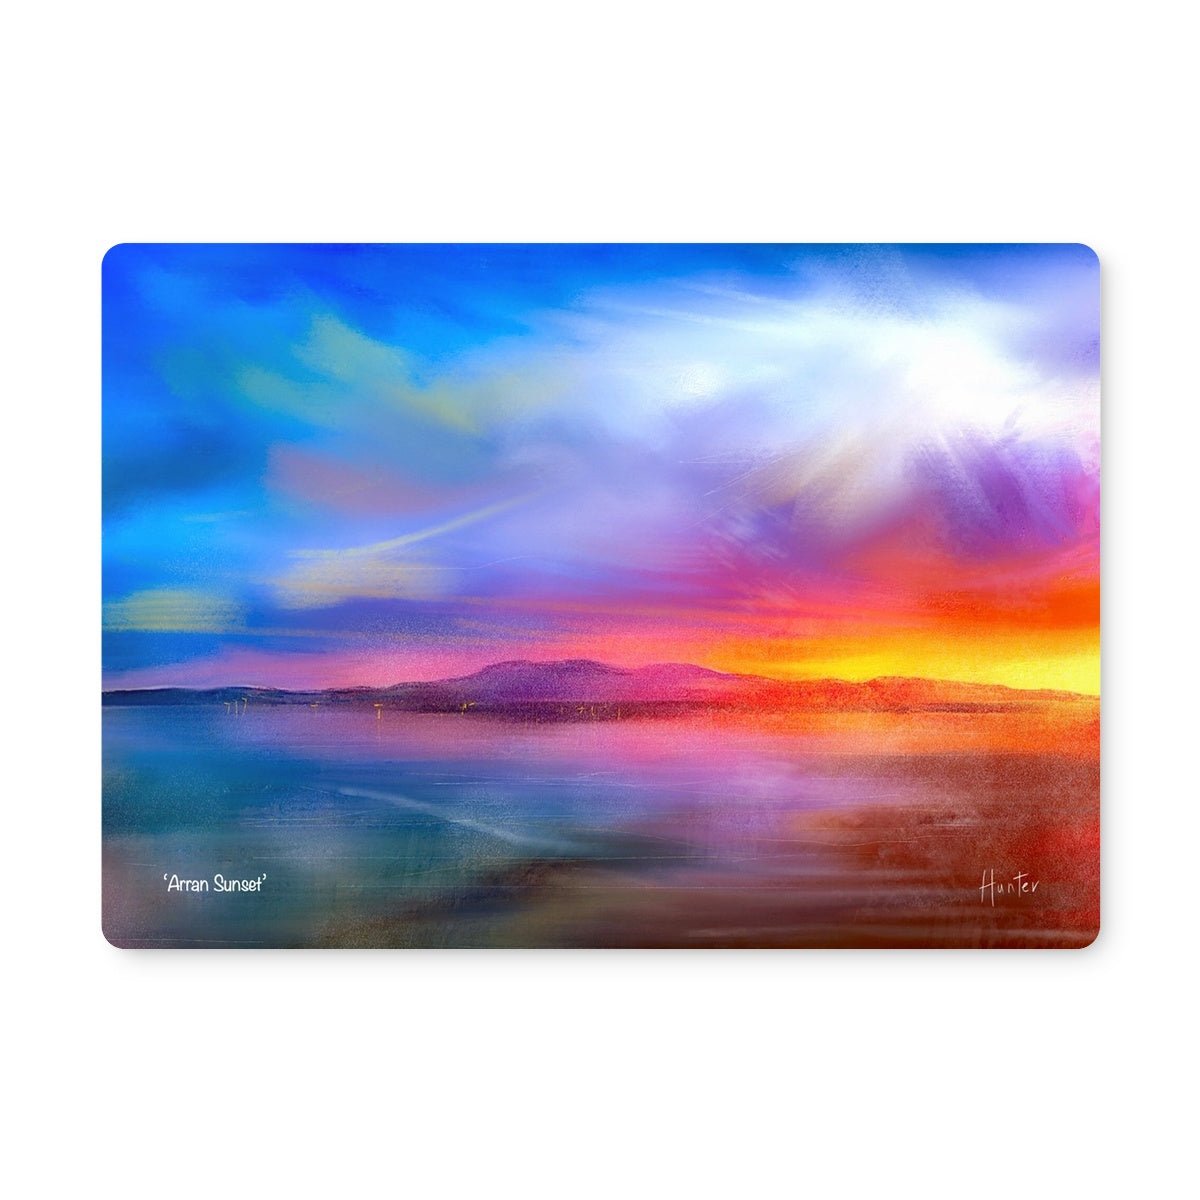 Arran Sunset Art Gifts Placemat-Placemats-Arran Art Gallery-Single Placemat-Paintings, Prints, Homeware, Art Gifts From Scotland By Scottish Artist Kevin Hunter